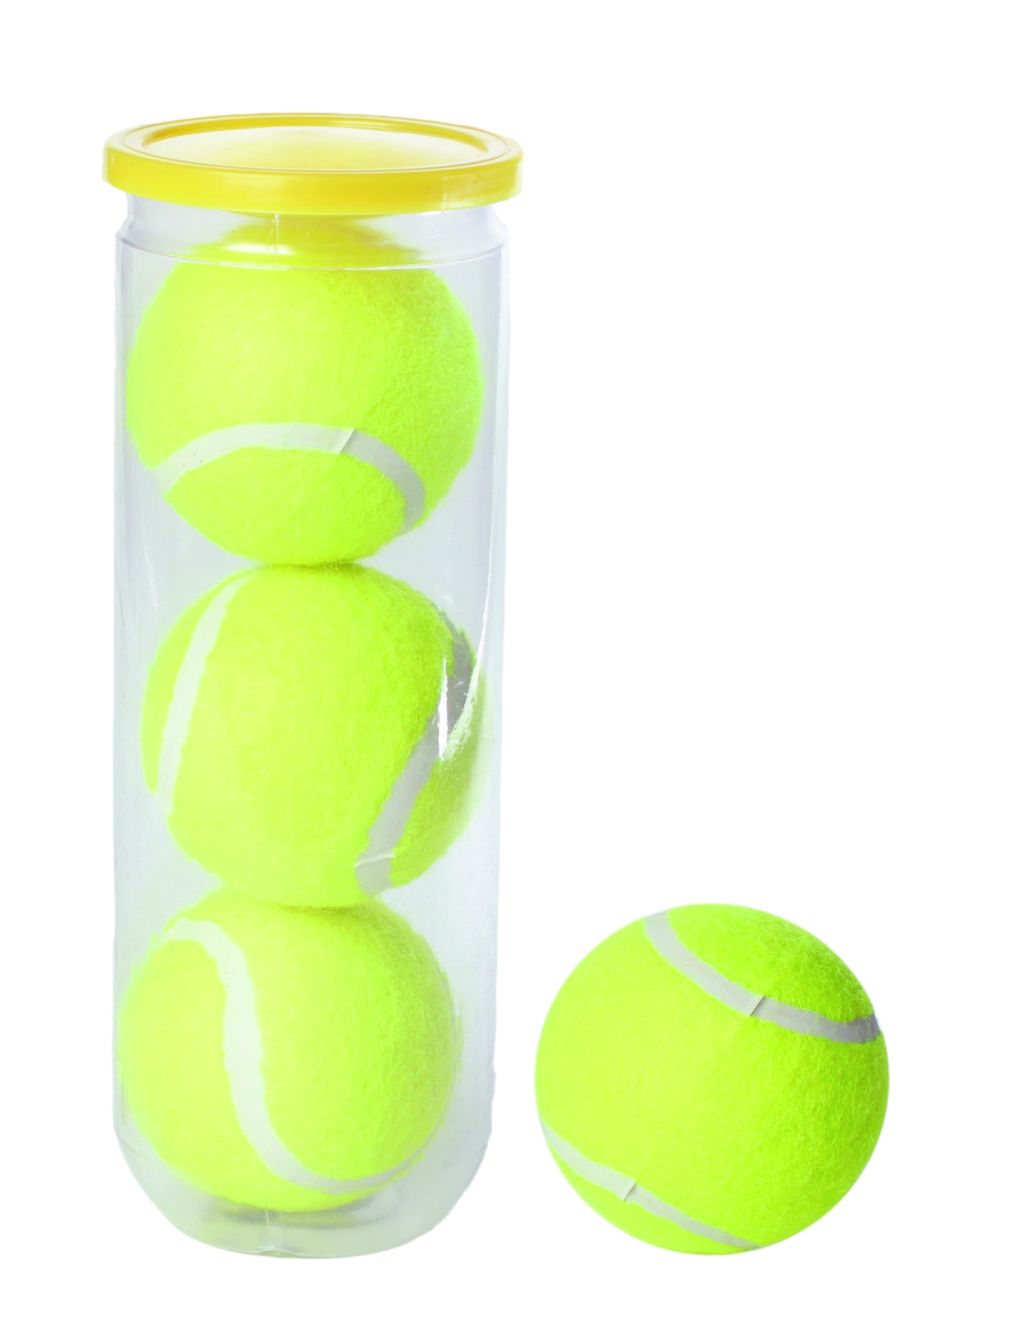 Concorde Tennis Ball Tin Png Image Clipart